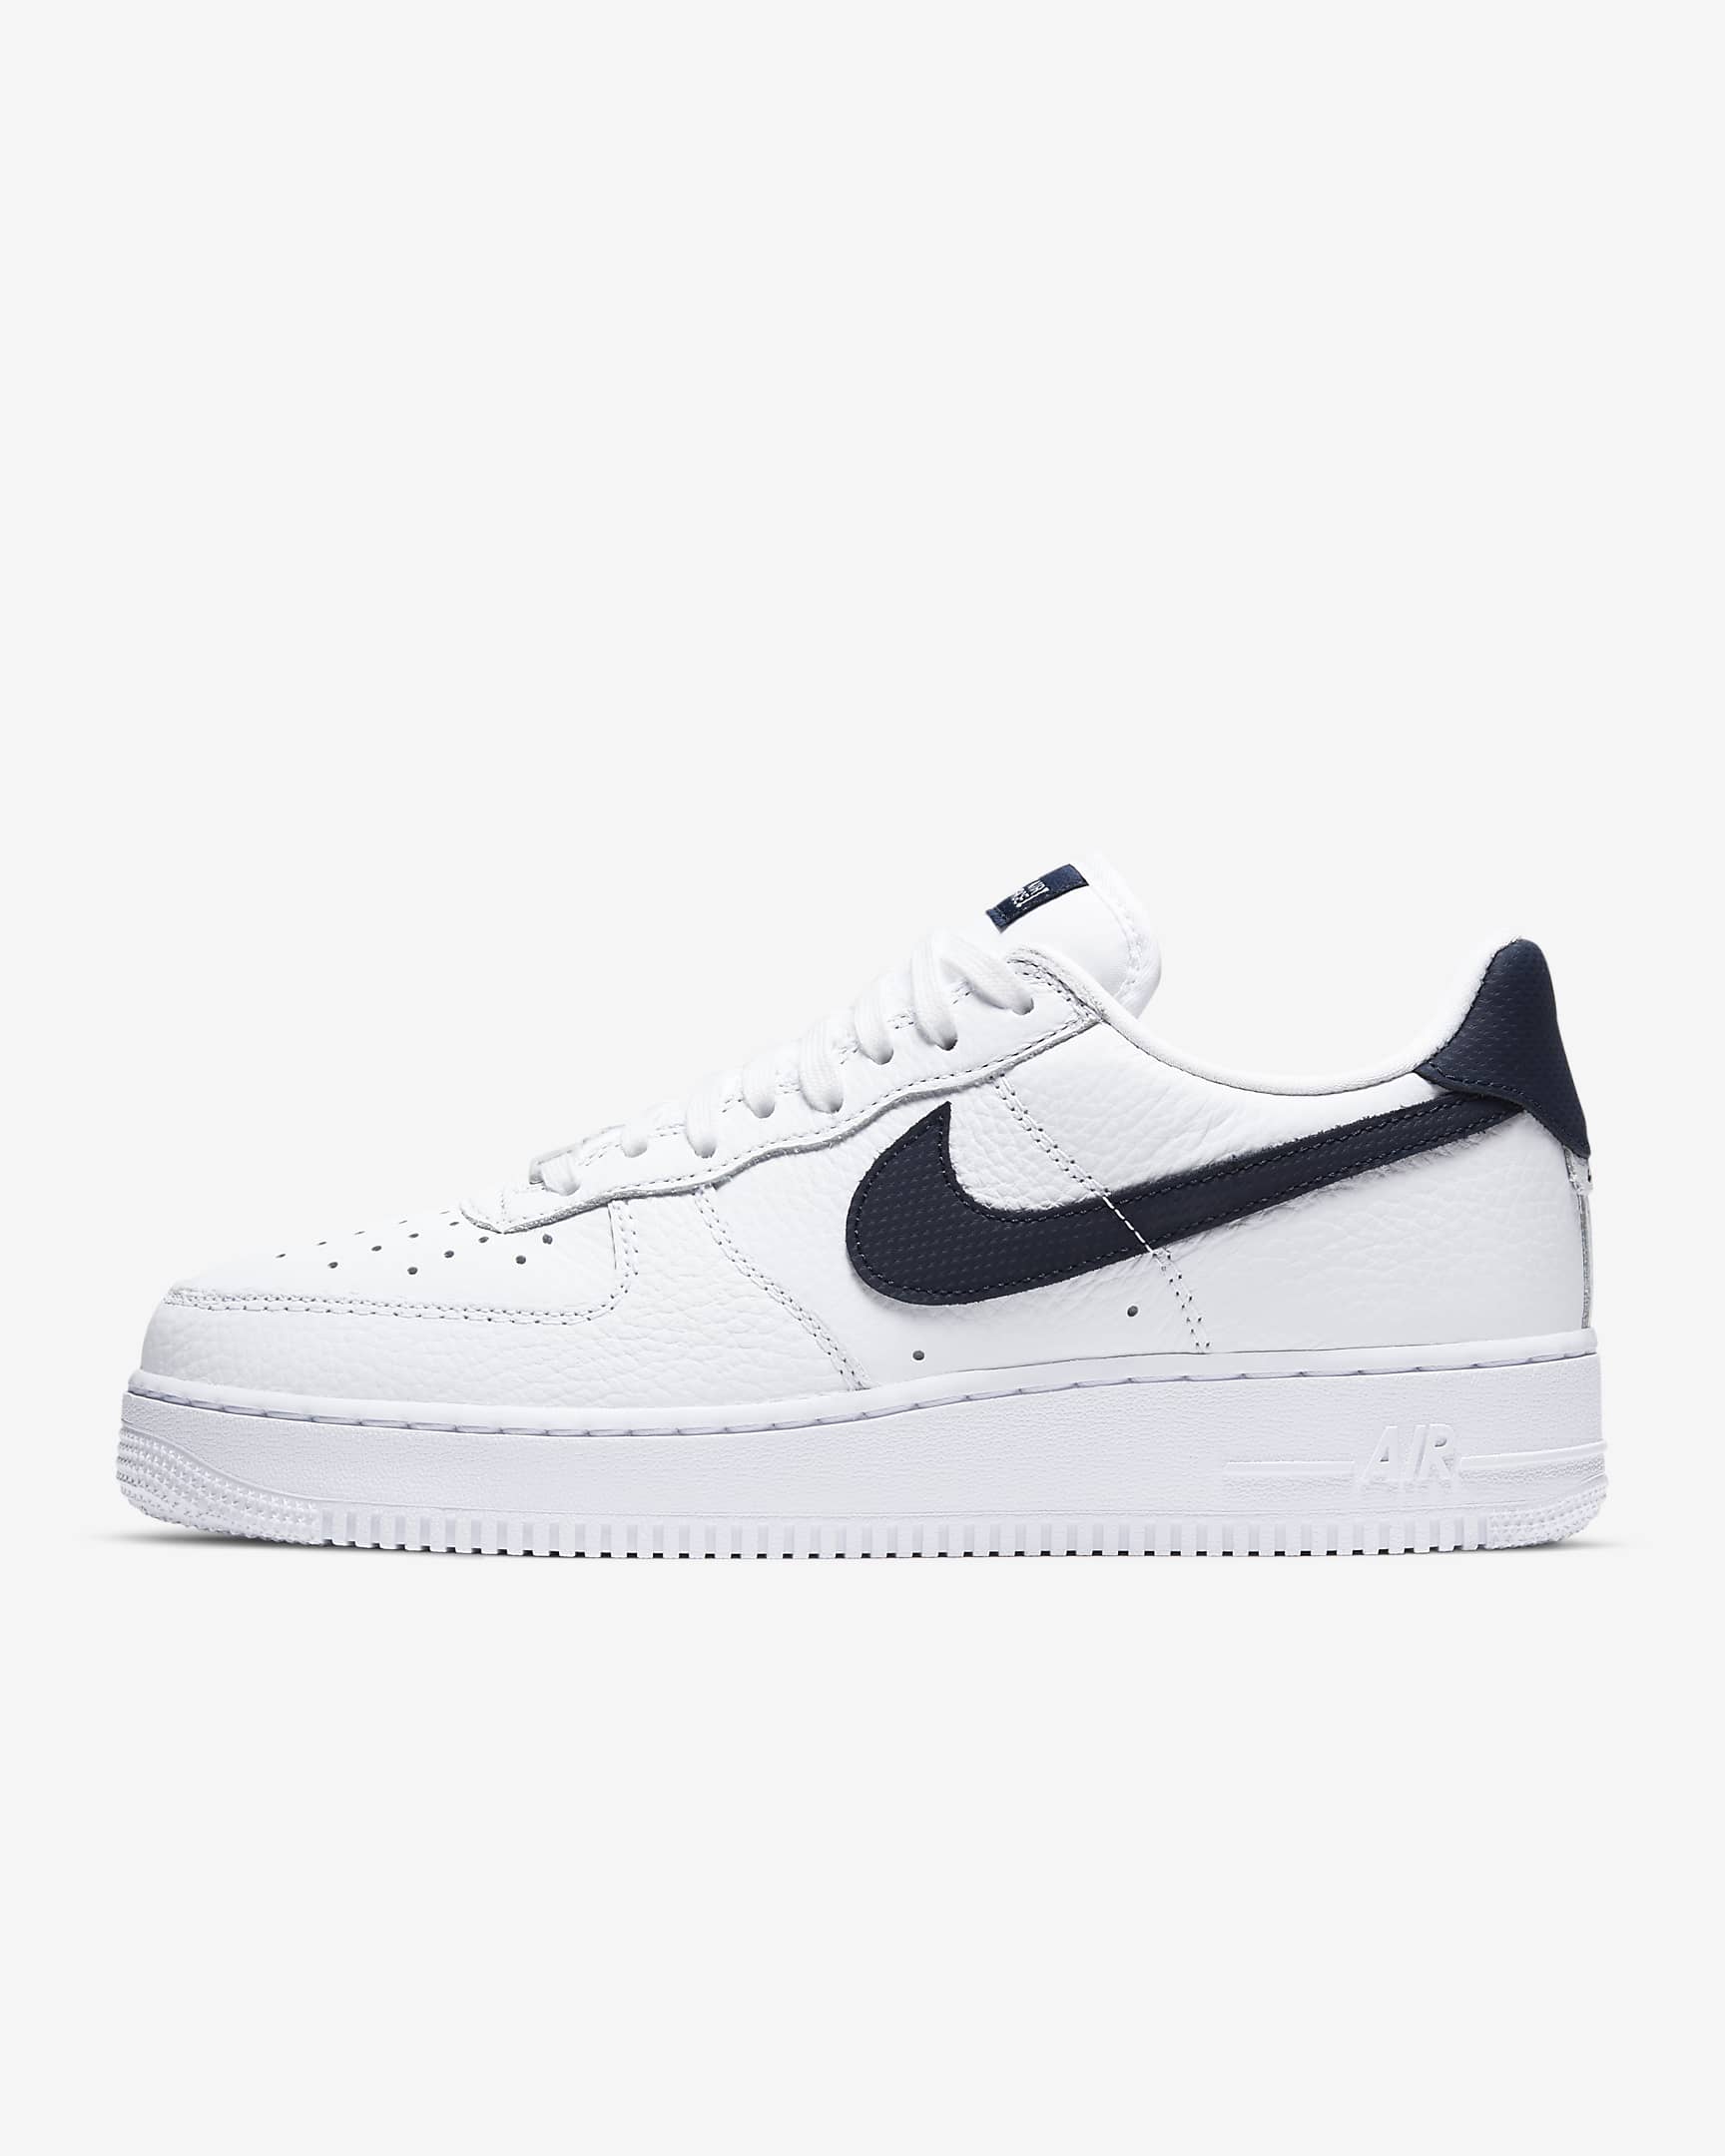 Nike Air Force 1 Black Friday On Sale, UP TO 56% OFF